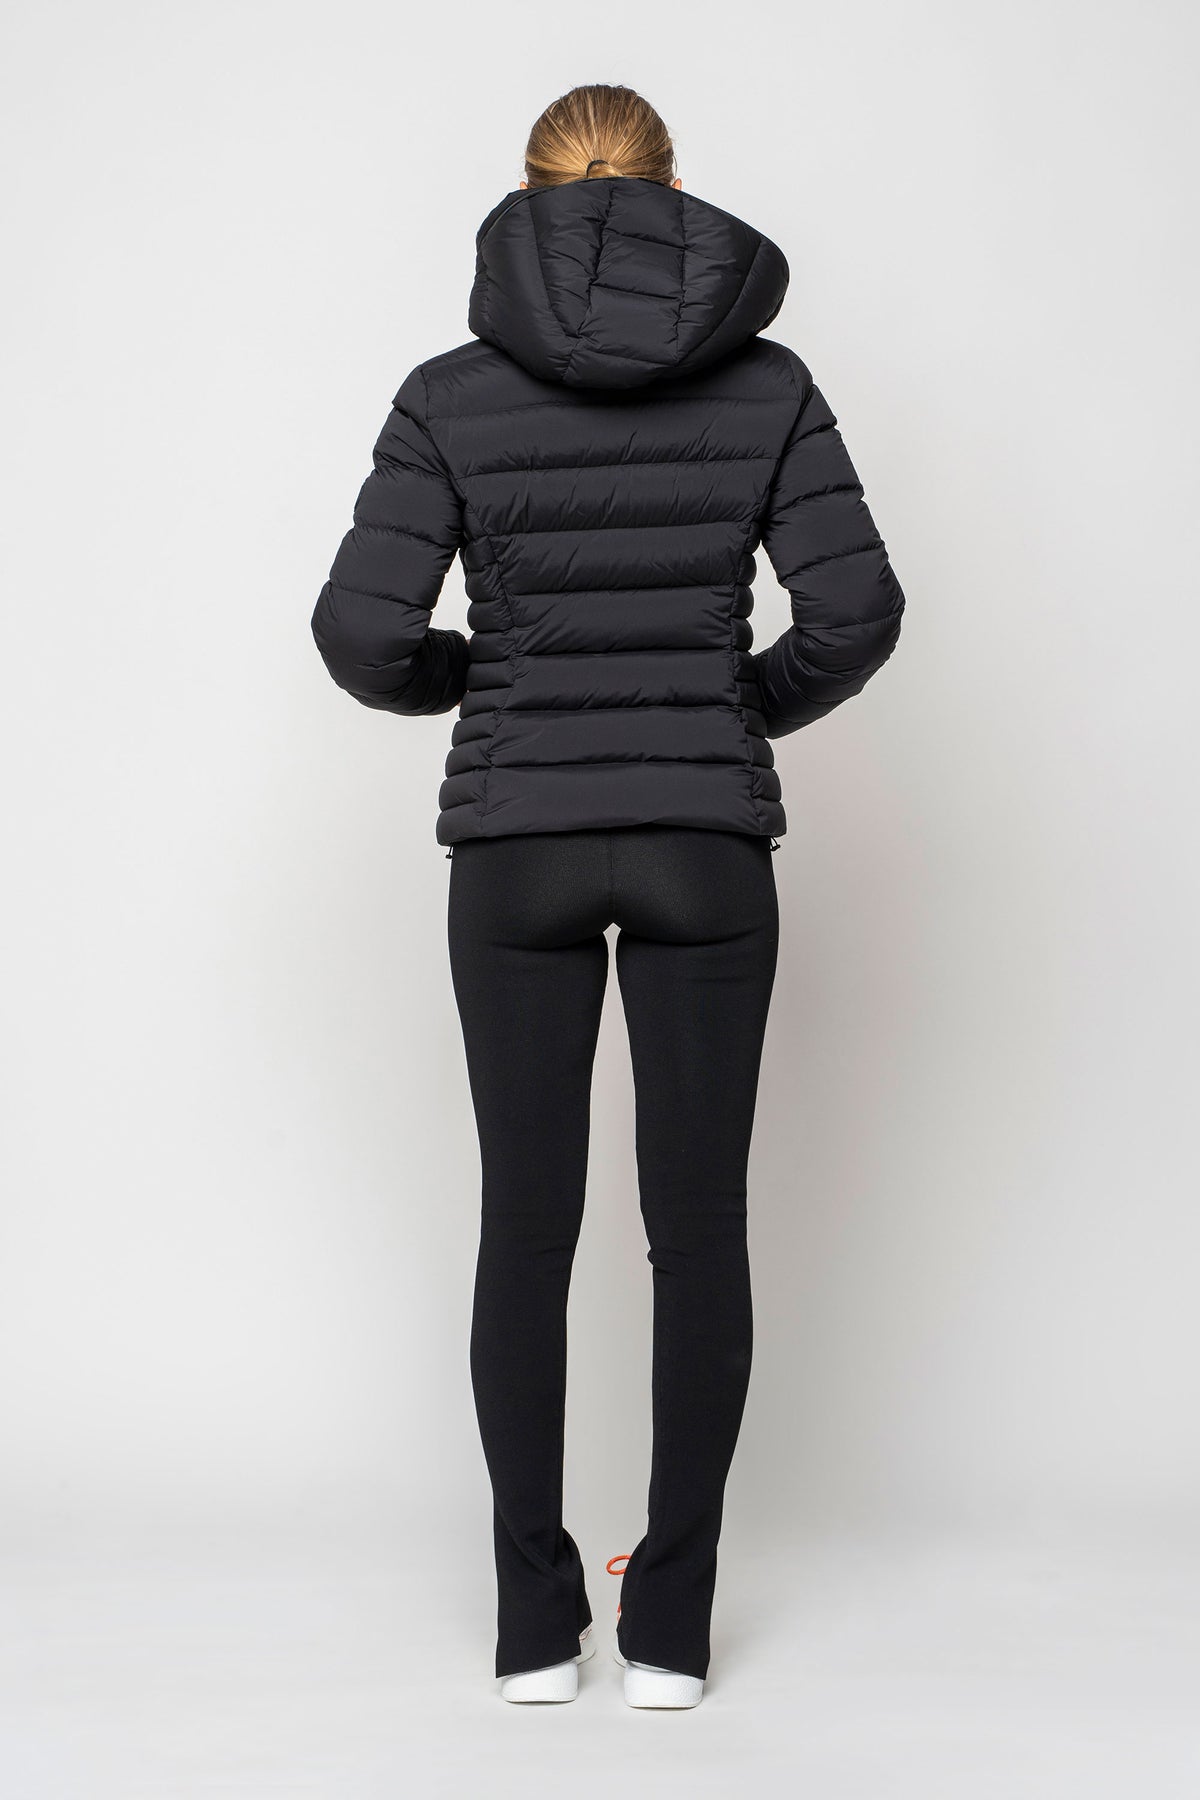 Moncler Matte Black Herbe Fitted Puffer Jacket With Hood